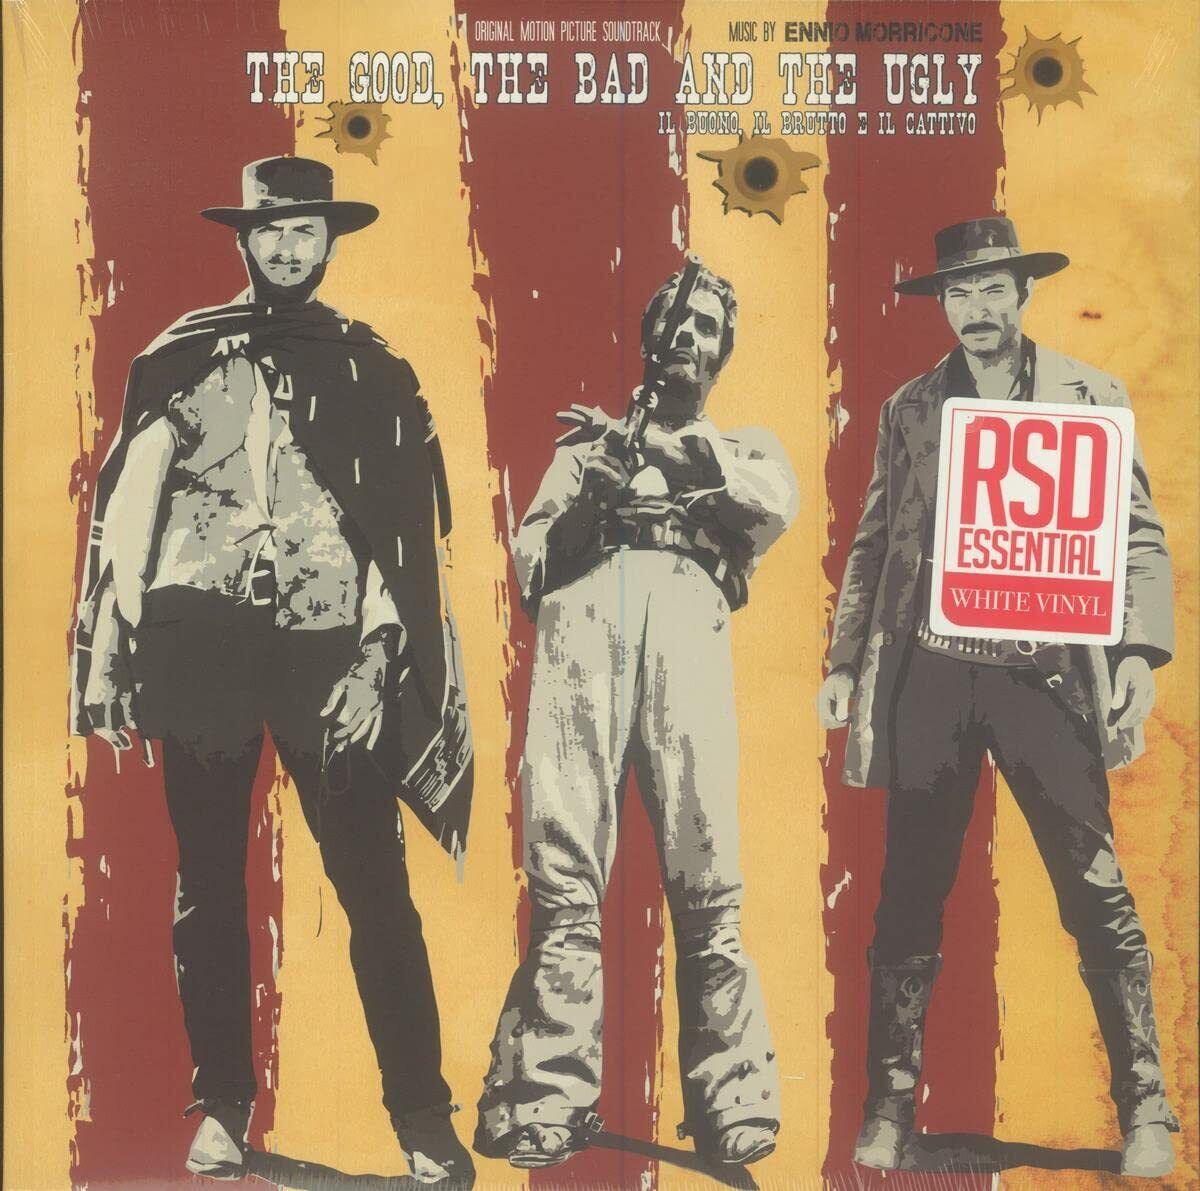 Ennio Morricone The Good, The Bad And The Ugly (Vinyl)